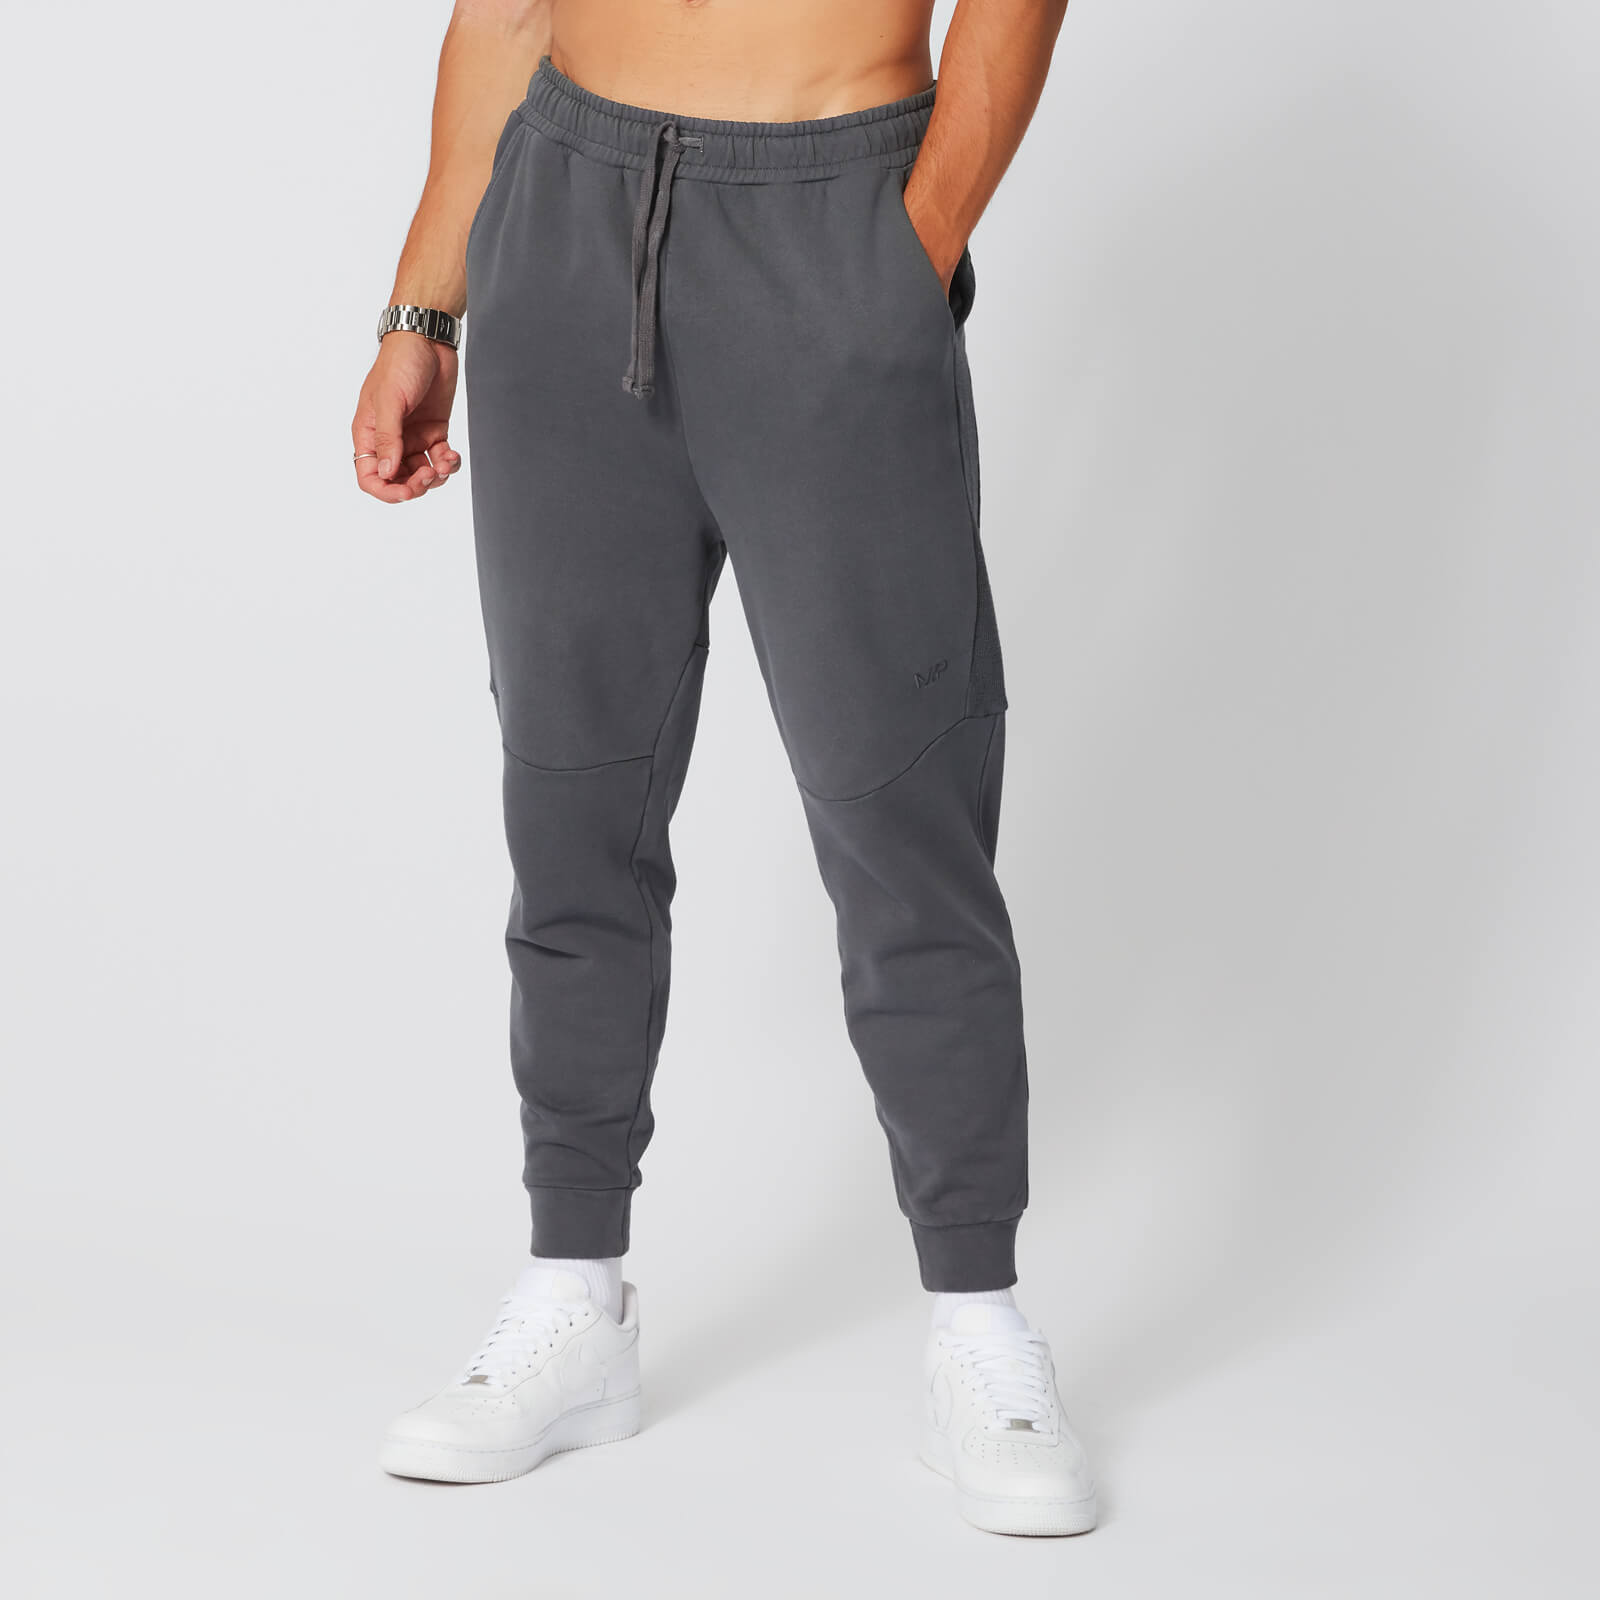 Washed Joggers - Grey - XS